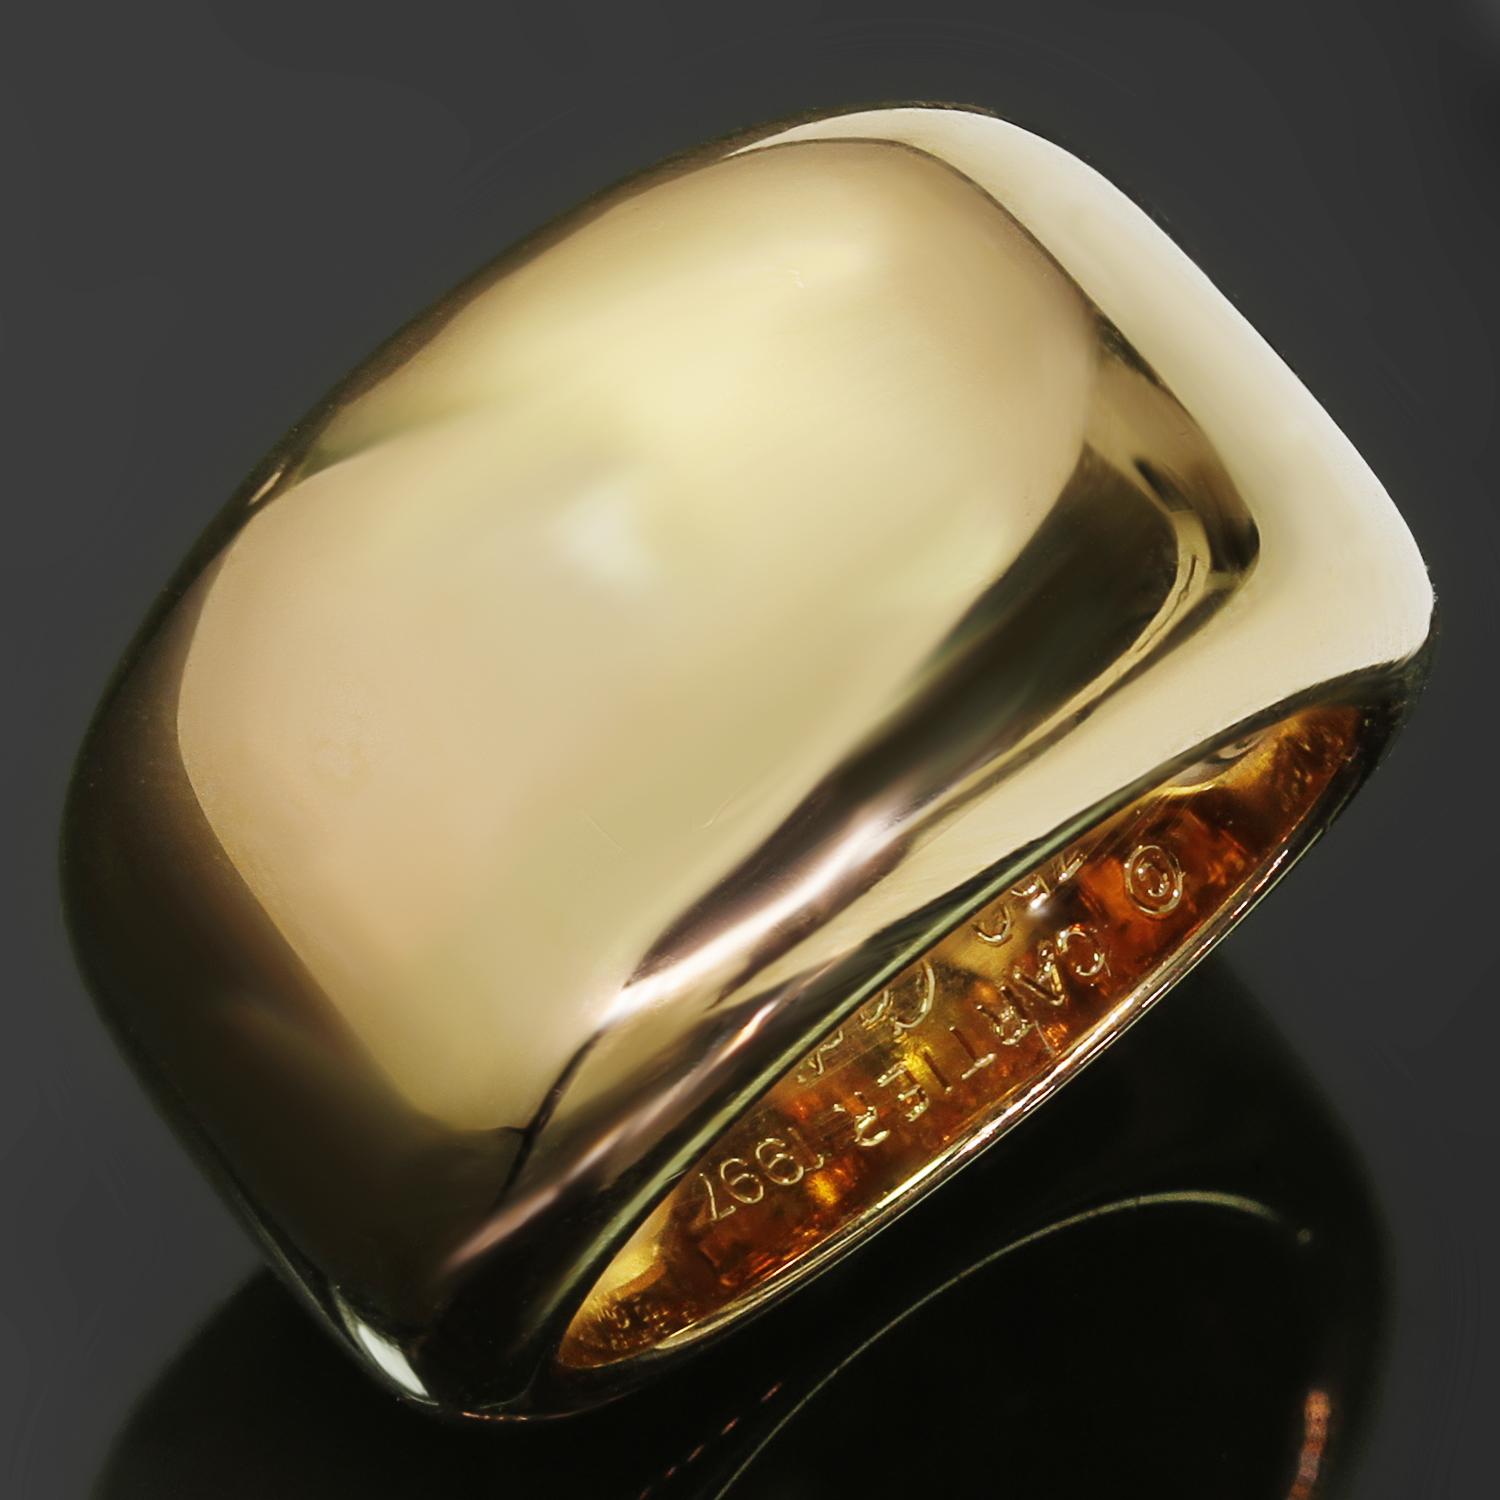 This classic Cartier ring from the Nouvelle Vague features a wide band design crafted in 18k yellow gold. Made in France circa 1997. Measurements: 0.51